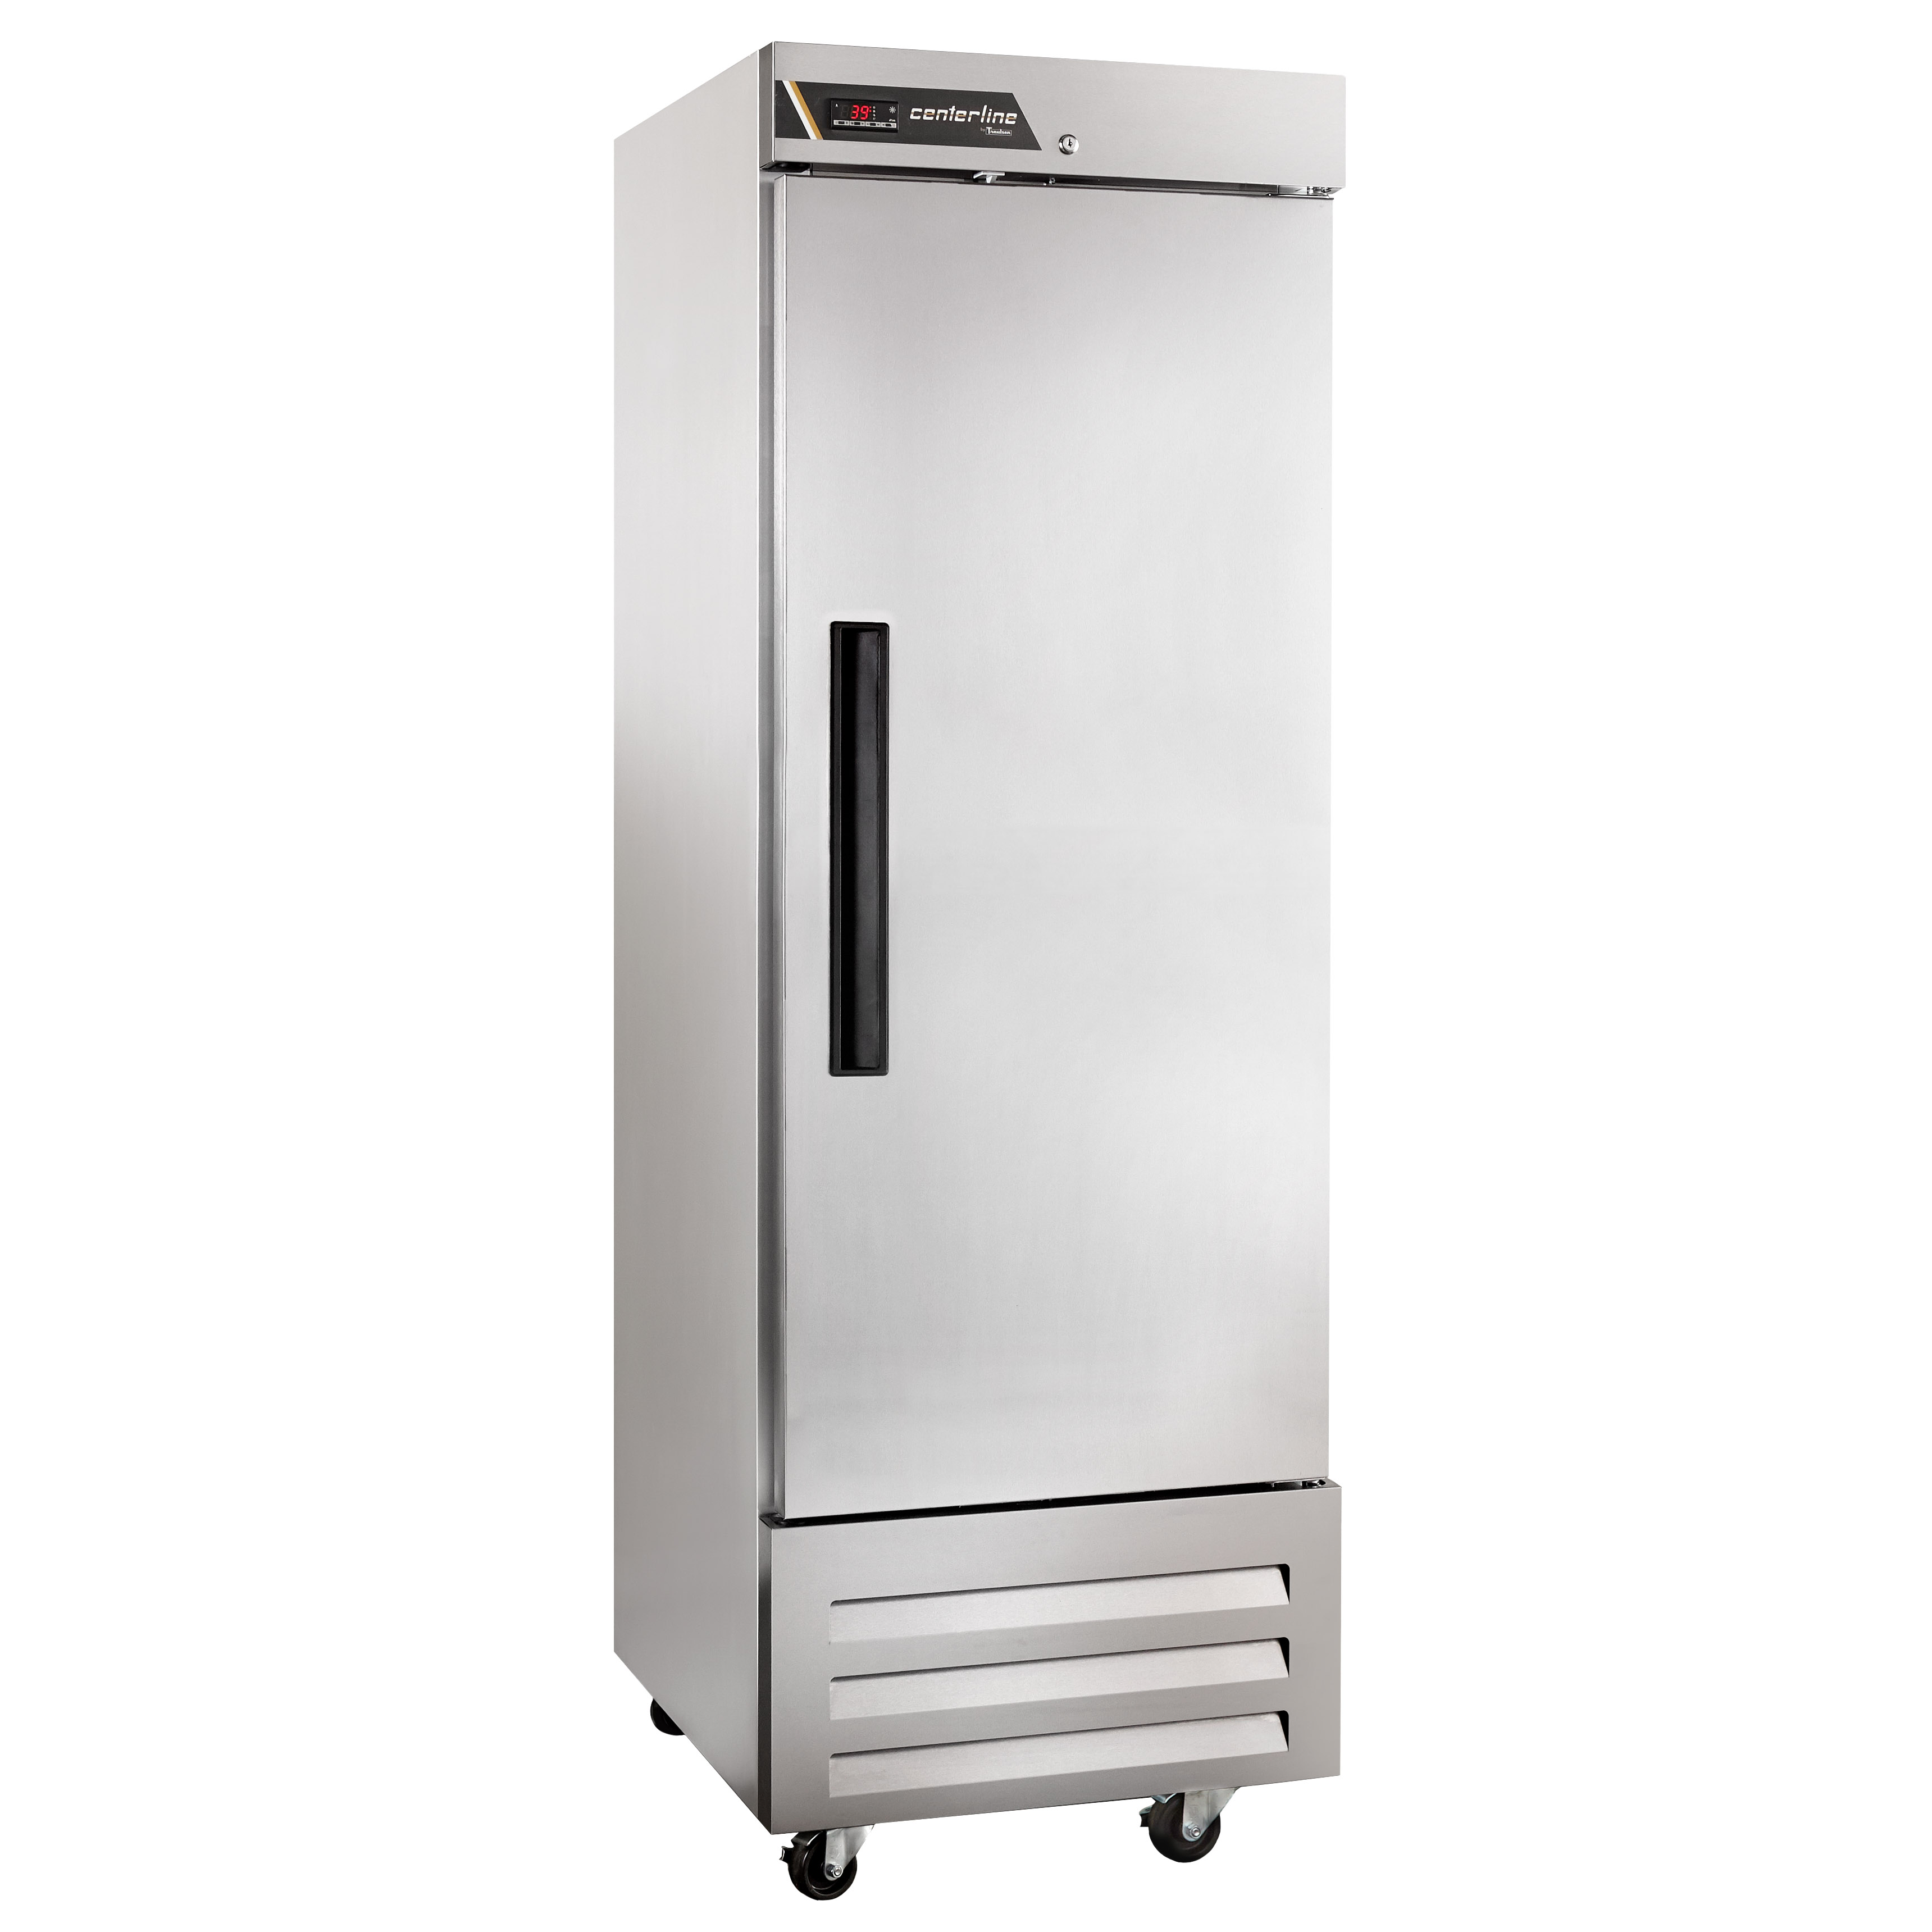 Centerline by Traulsen CLBM-23R-FS 1-Section Left/Right Hinged Solid Door Reach-In Refrigerator